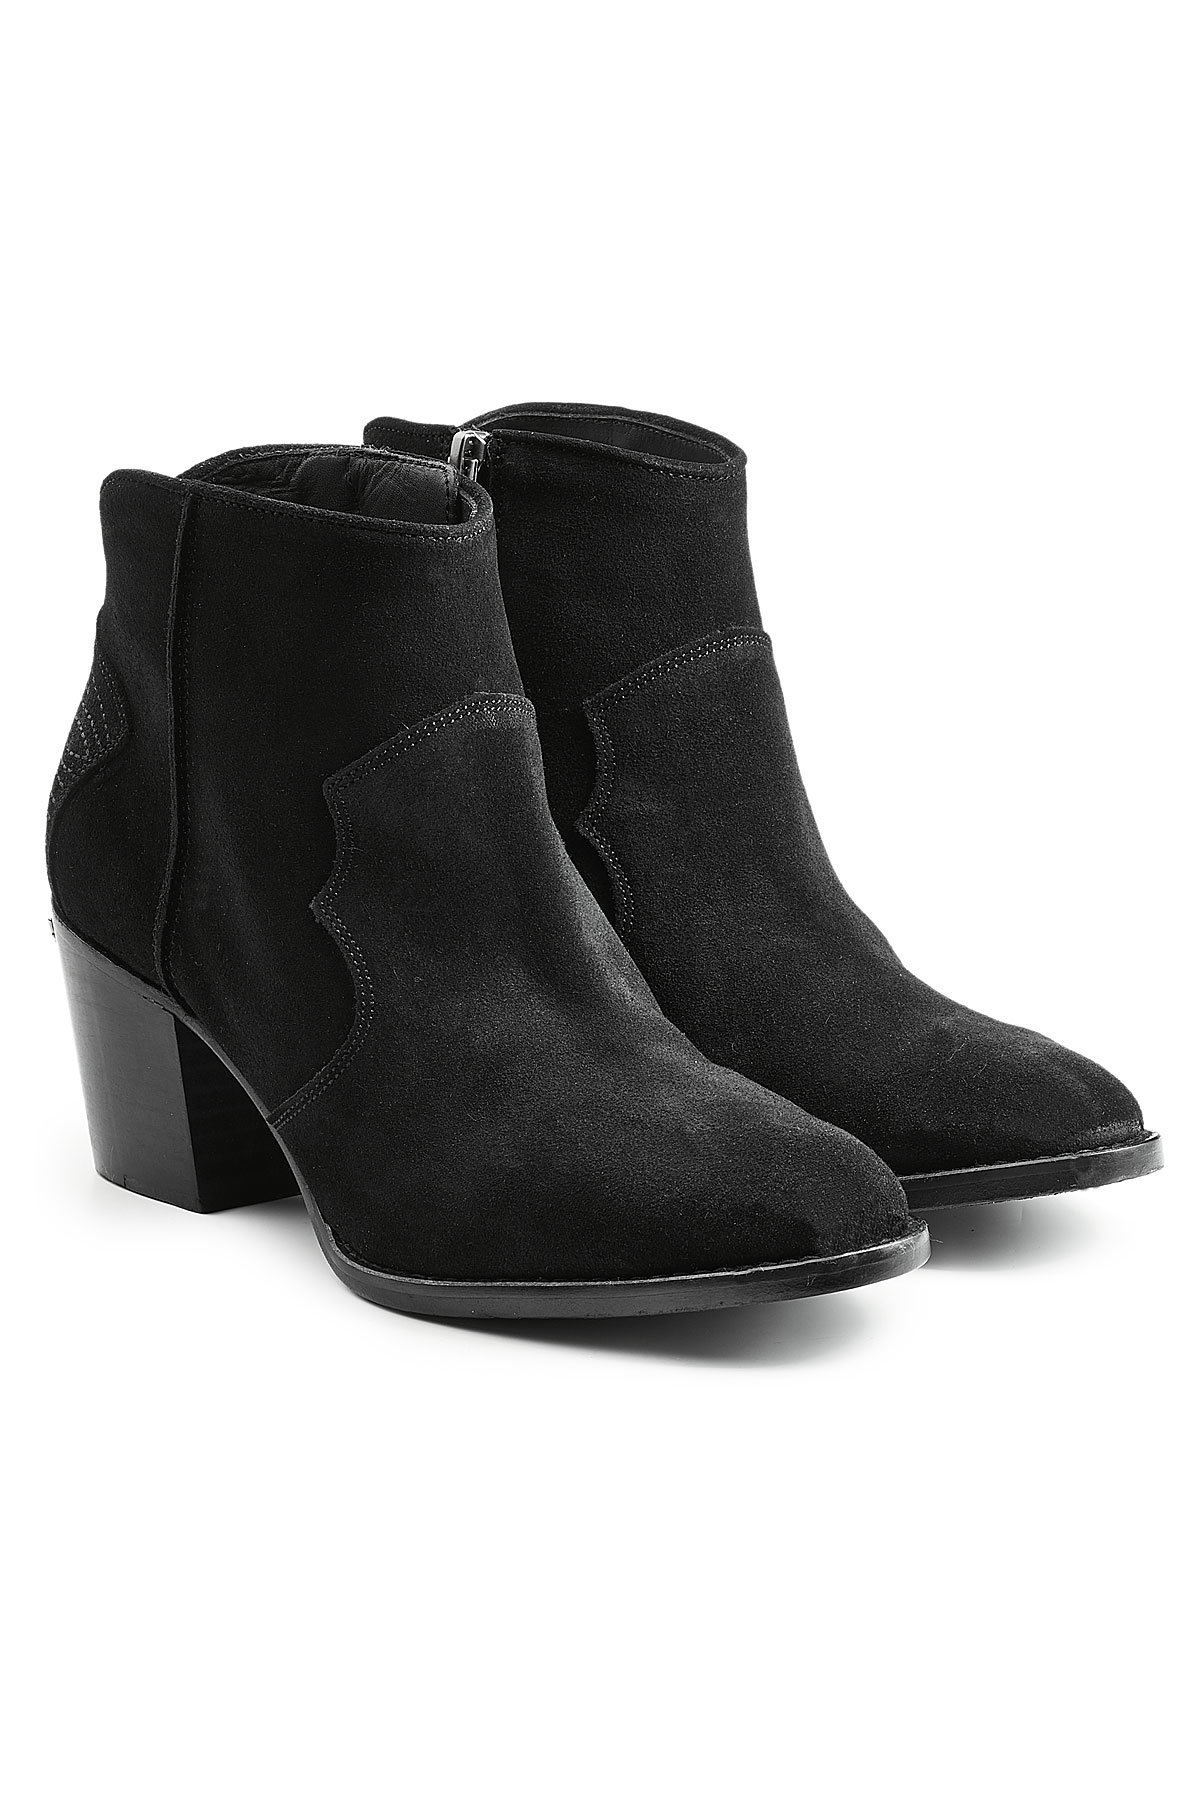 Molly Suede Ankle Boots by Zadig & Voltaire